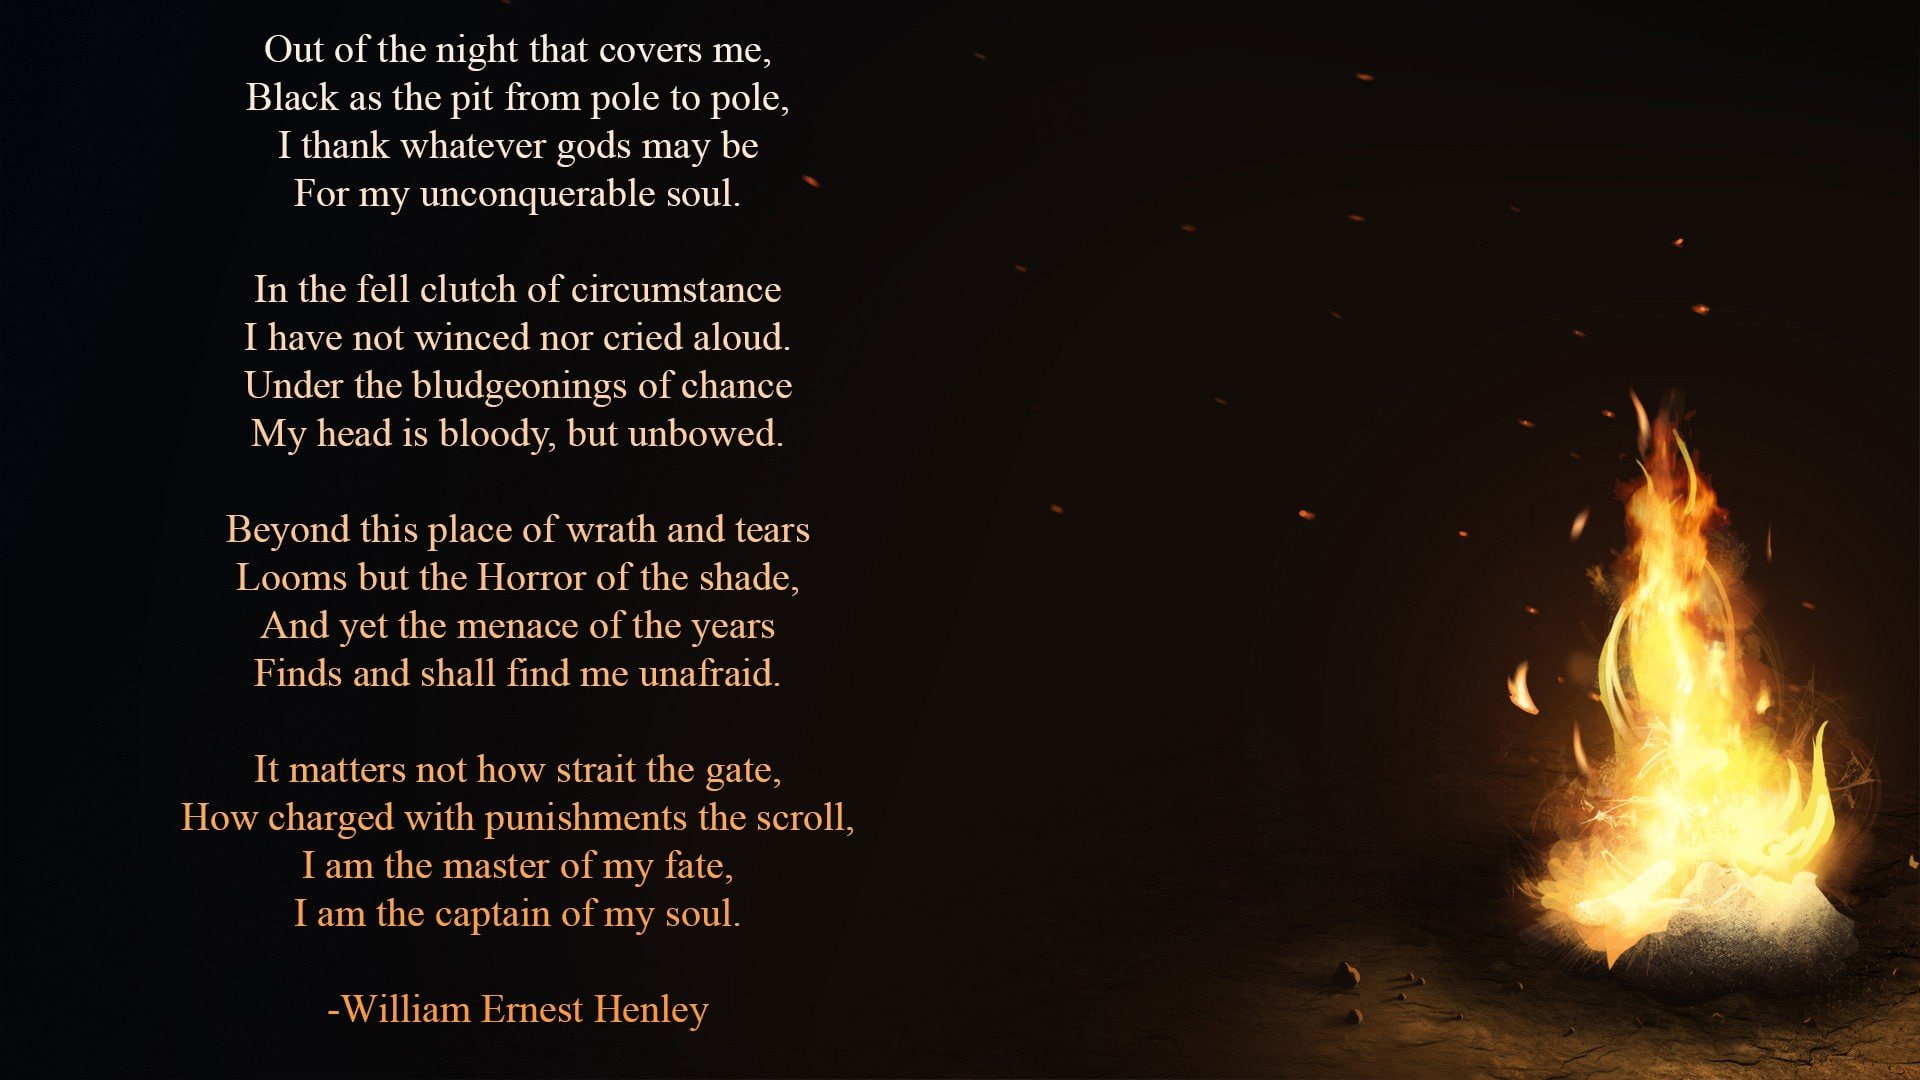 fire, Invictus, poetry, text, William Ernest Henley, writing